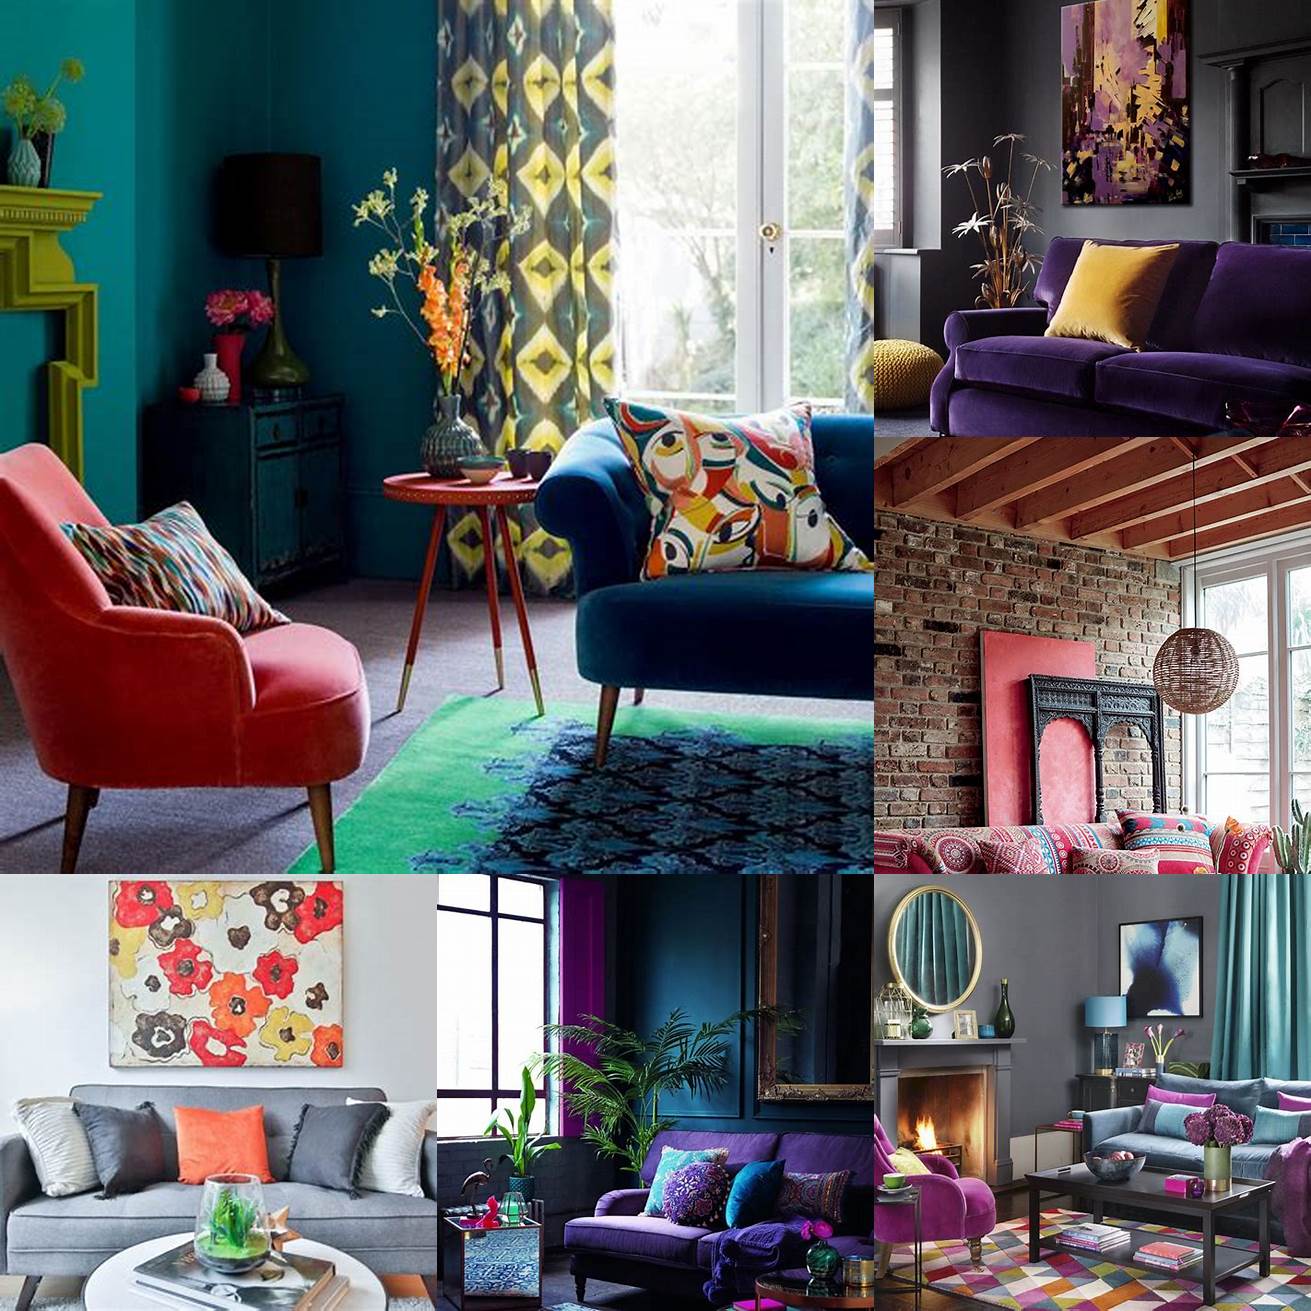 A retro sofa with bold colors and patterns can be a great focal point in your living room